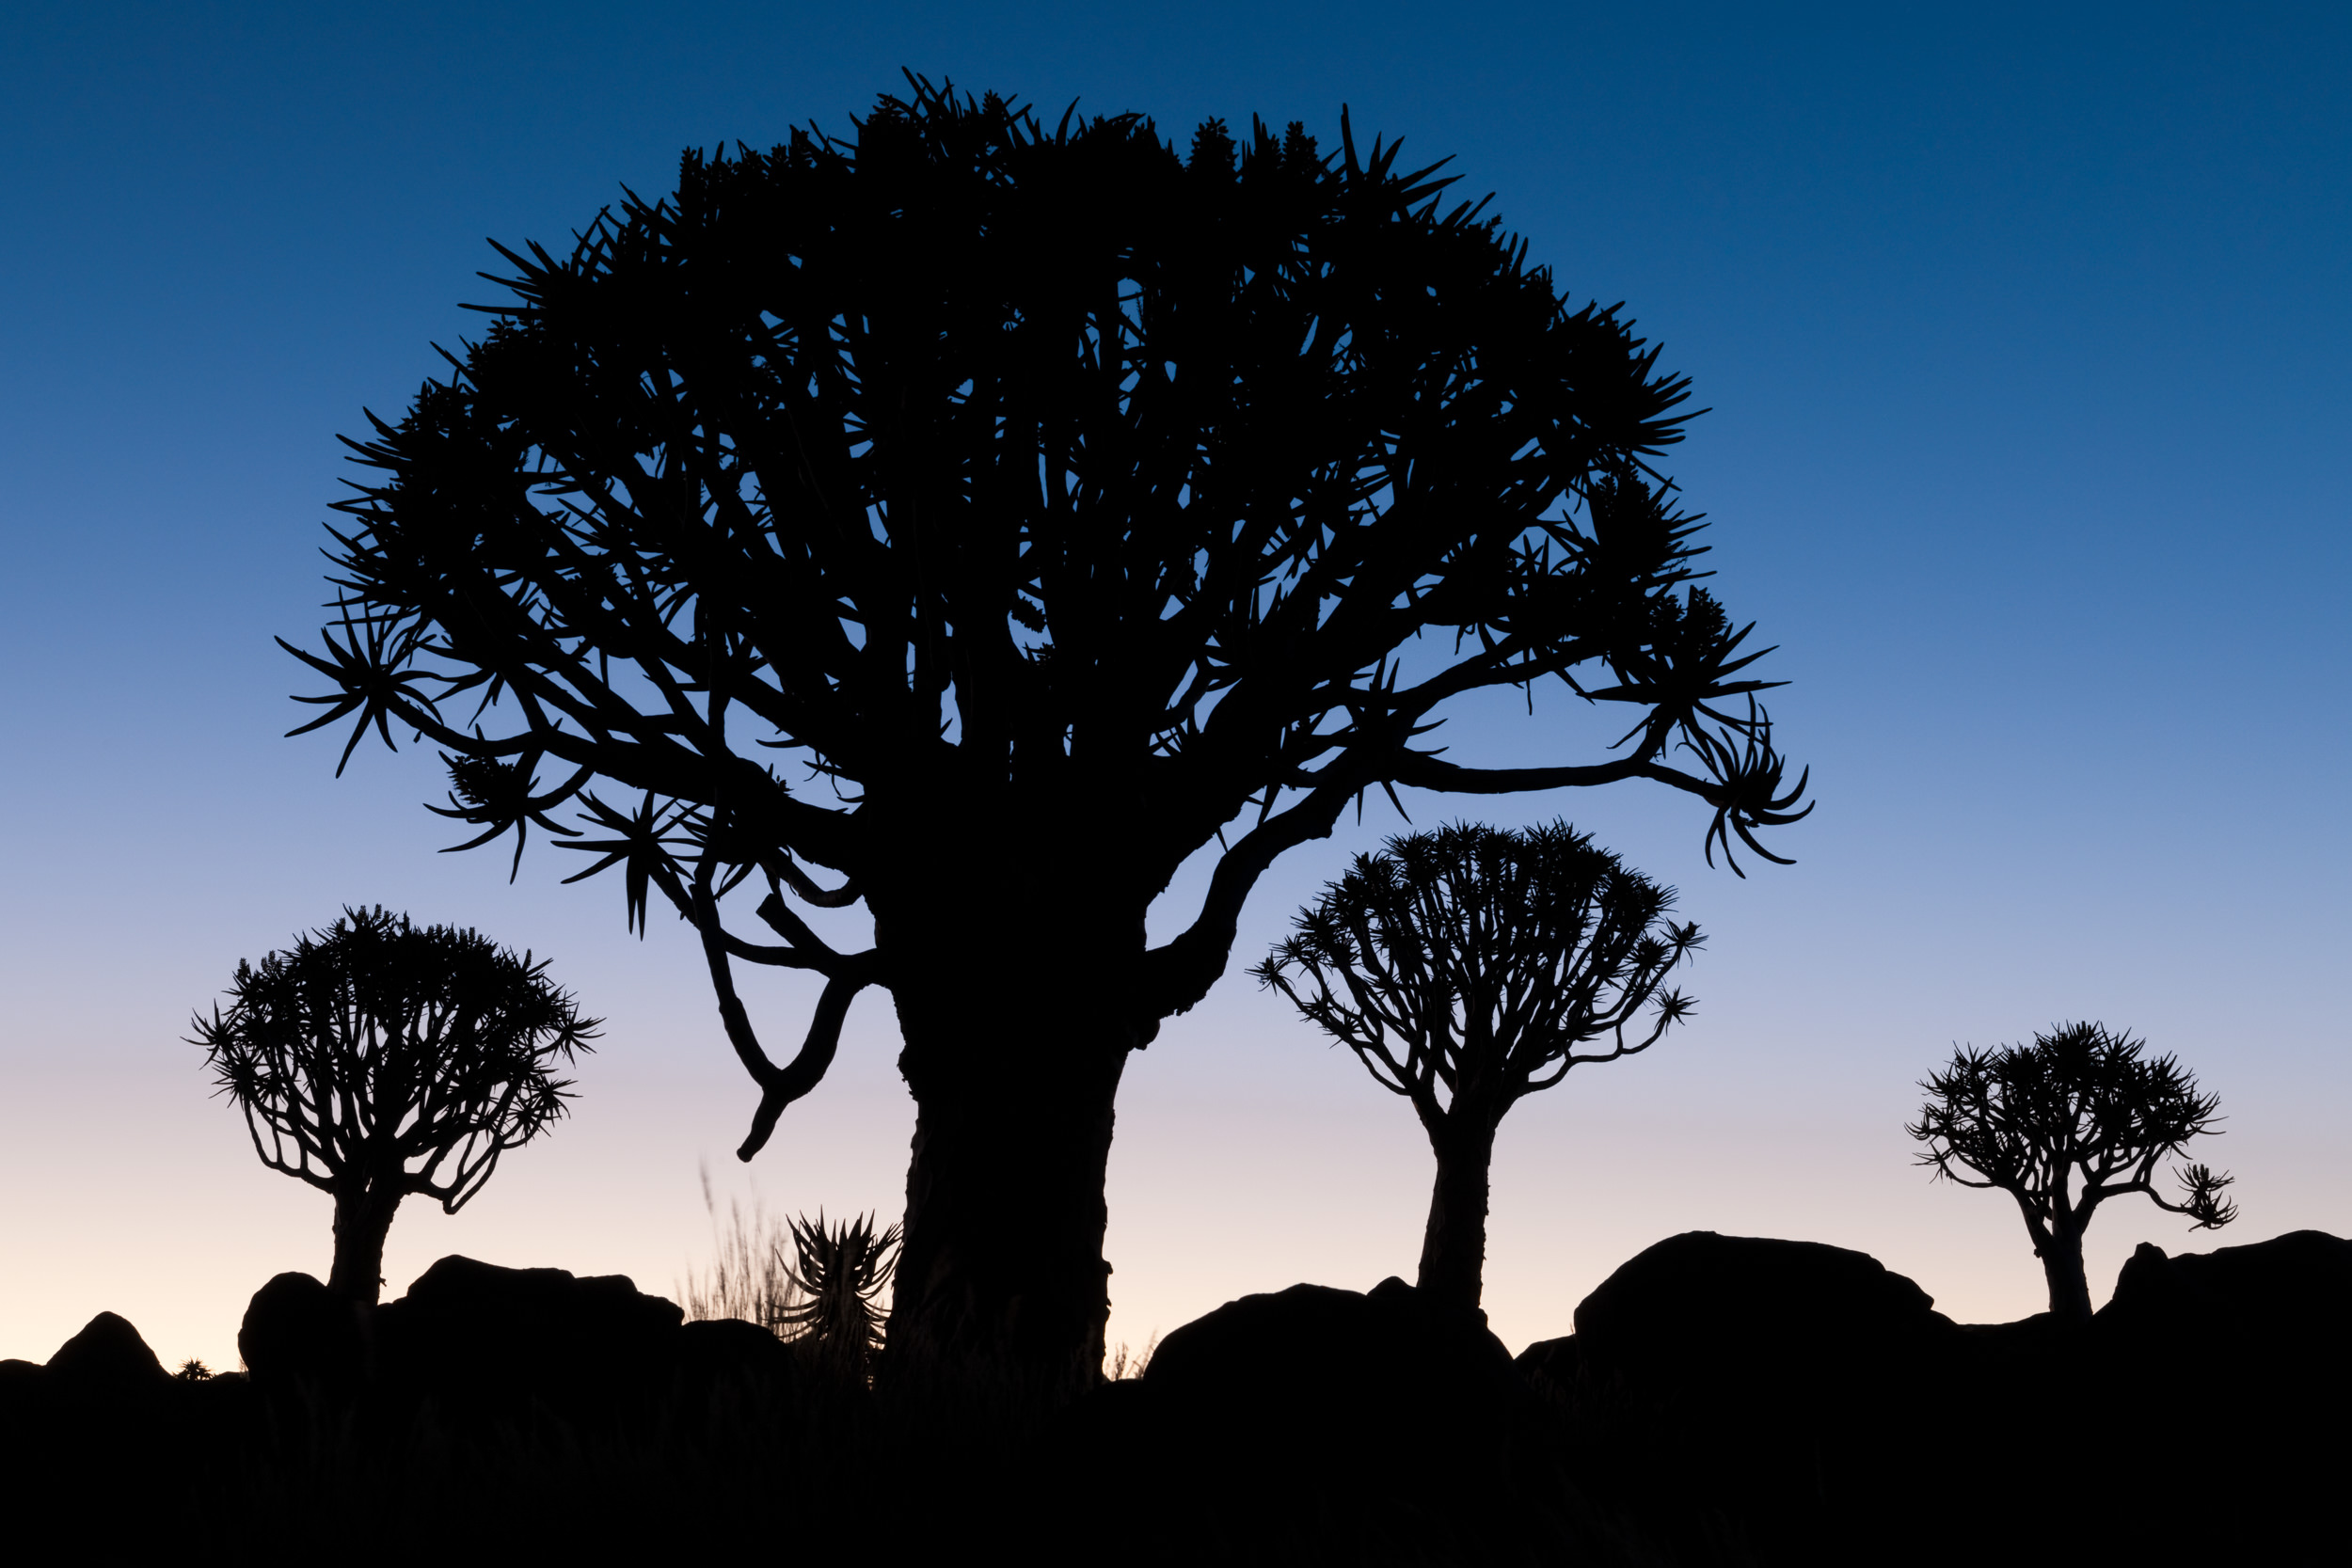 Example of playing with Silhouettes - Namibia, Rafael Rojas.jpg